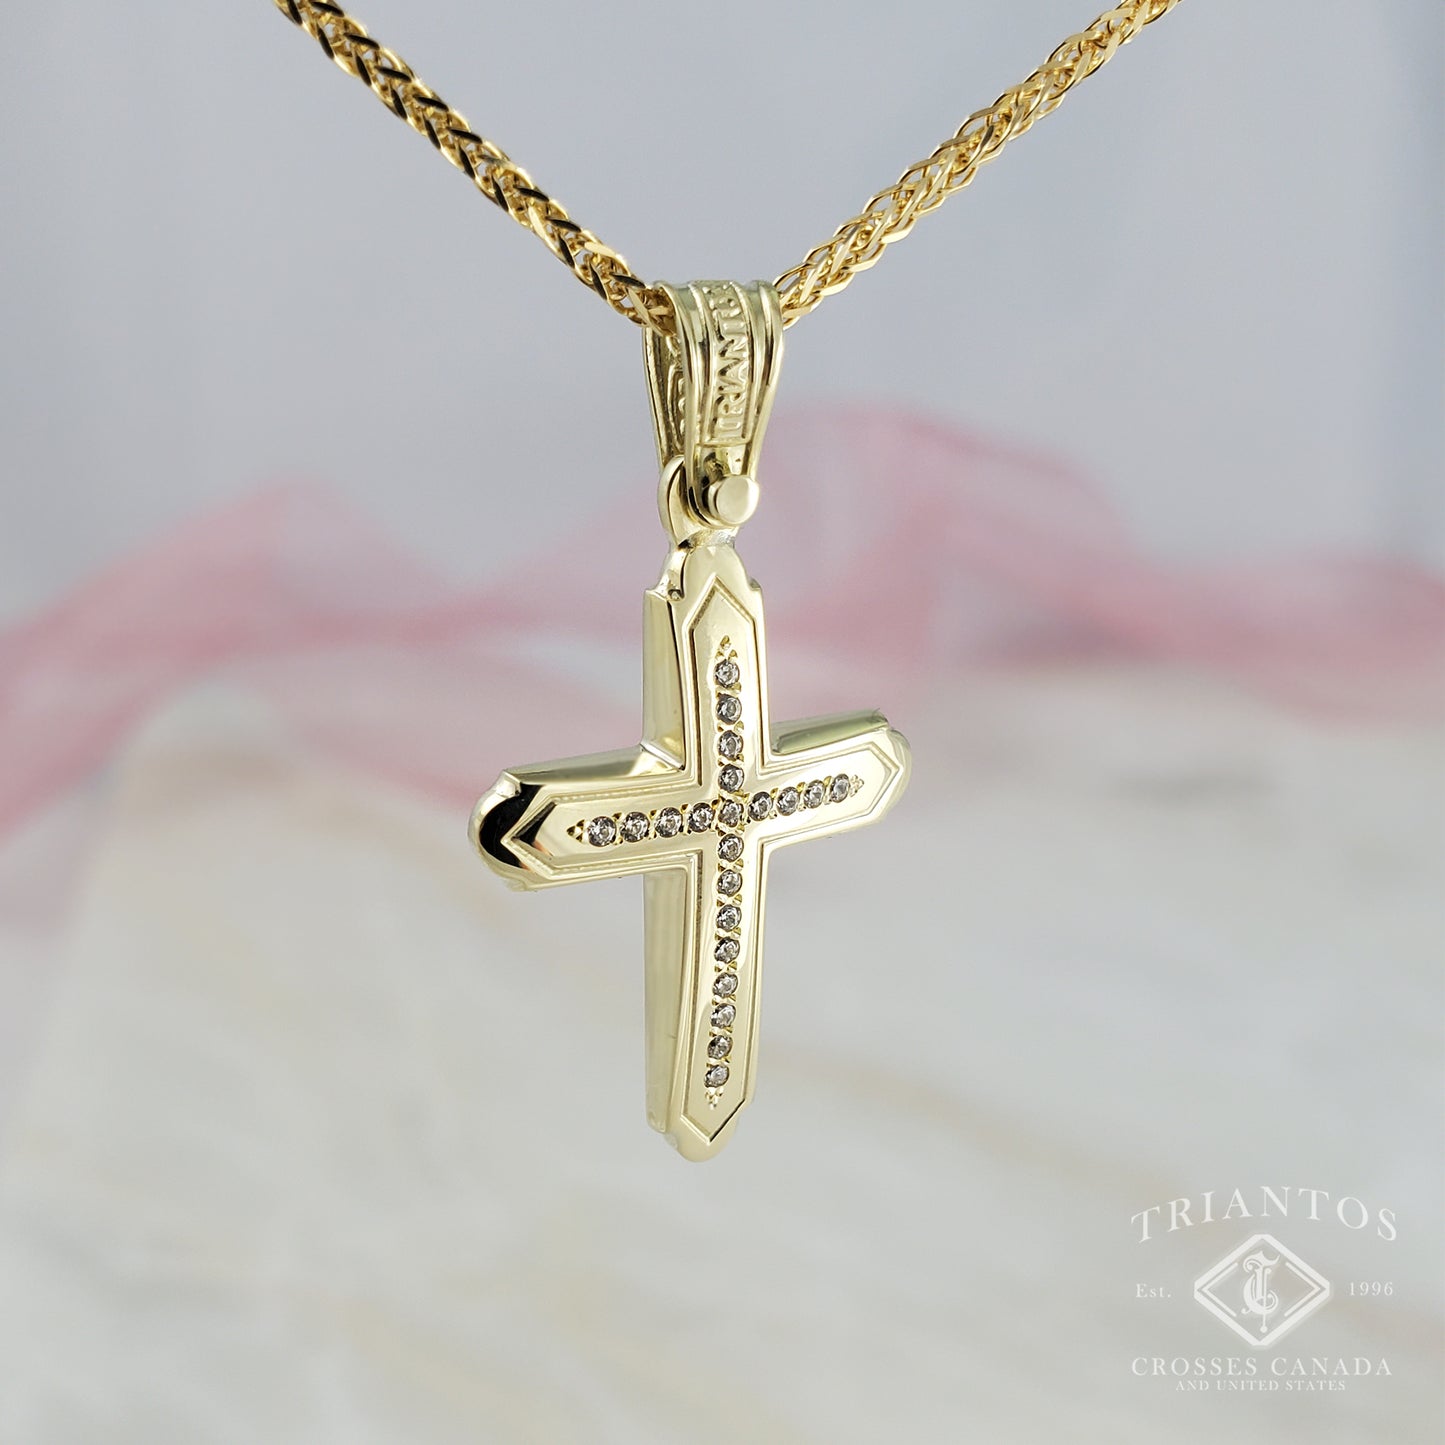 Woman's yellow gold cross pendant centered with 21 Sparkling cubic zirconia diamond-shaped stones and edged outline